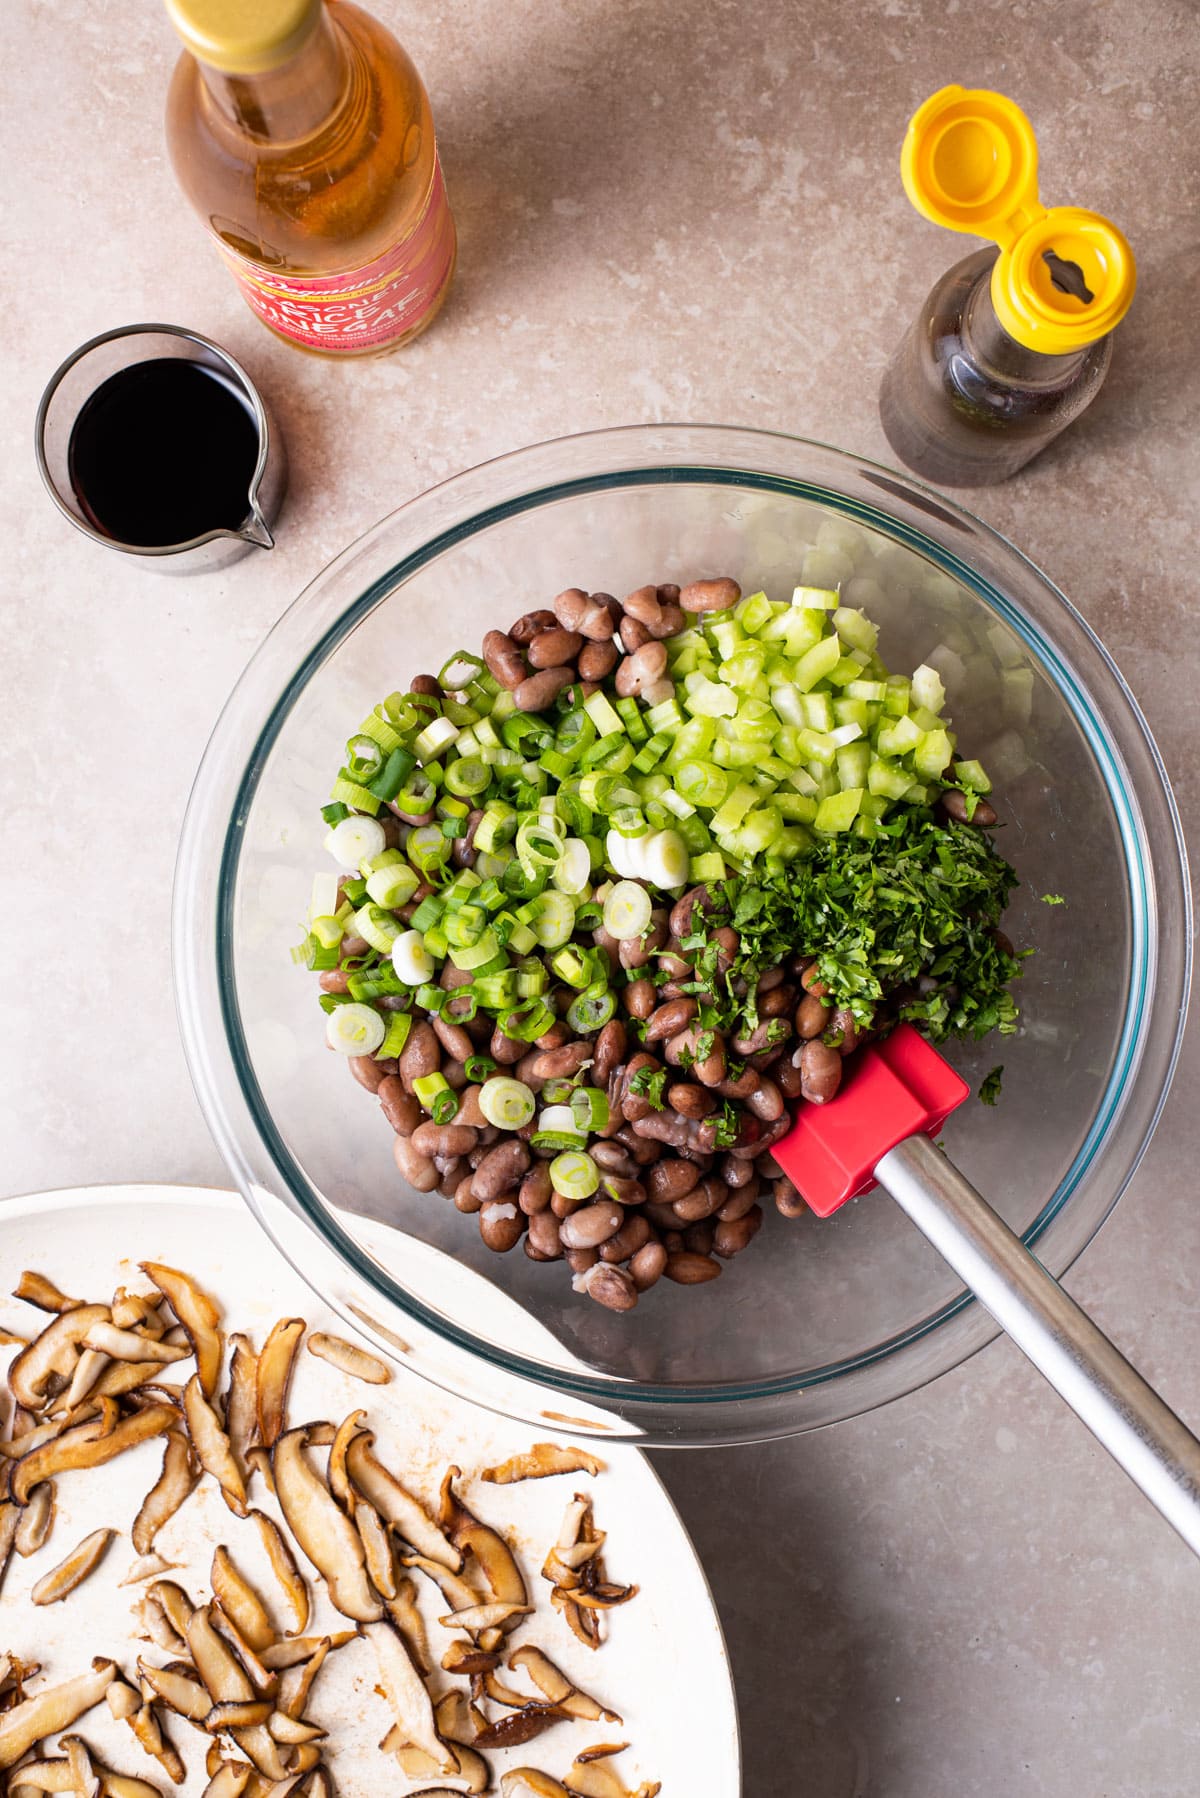 Beans and chopped herbs in a glass bowl, next to sauteed mushrooms.